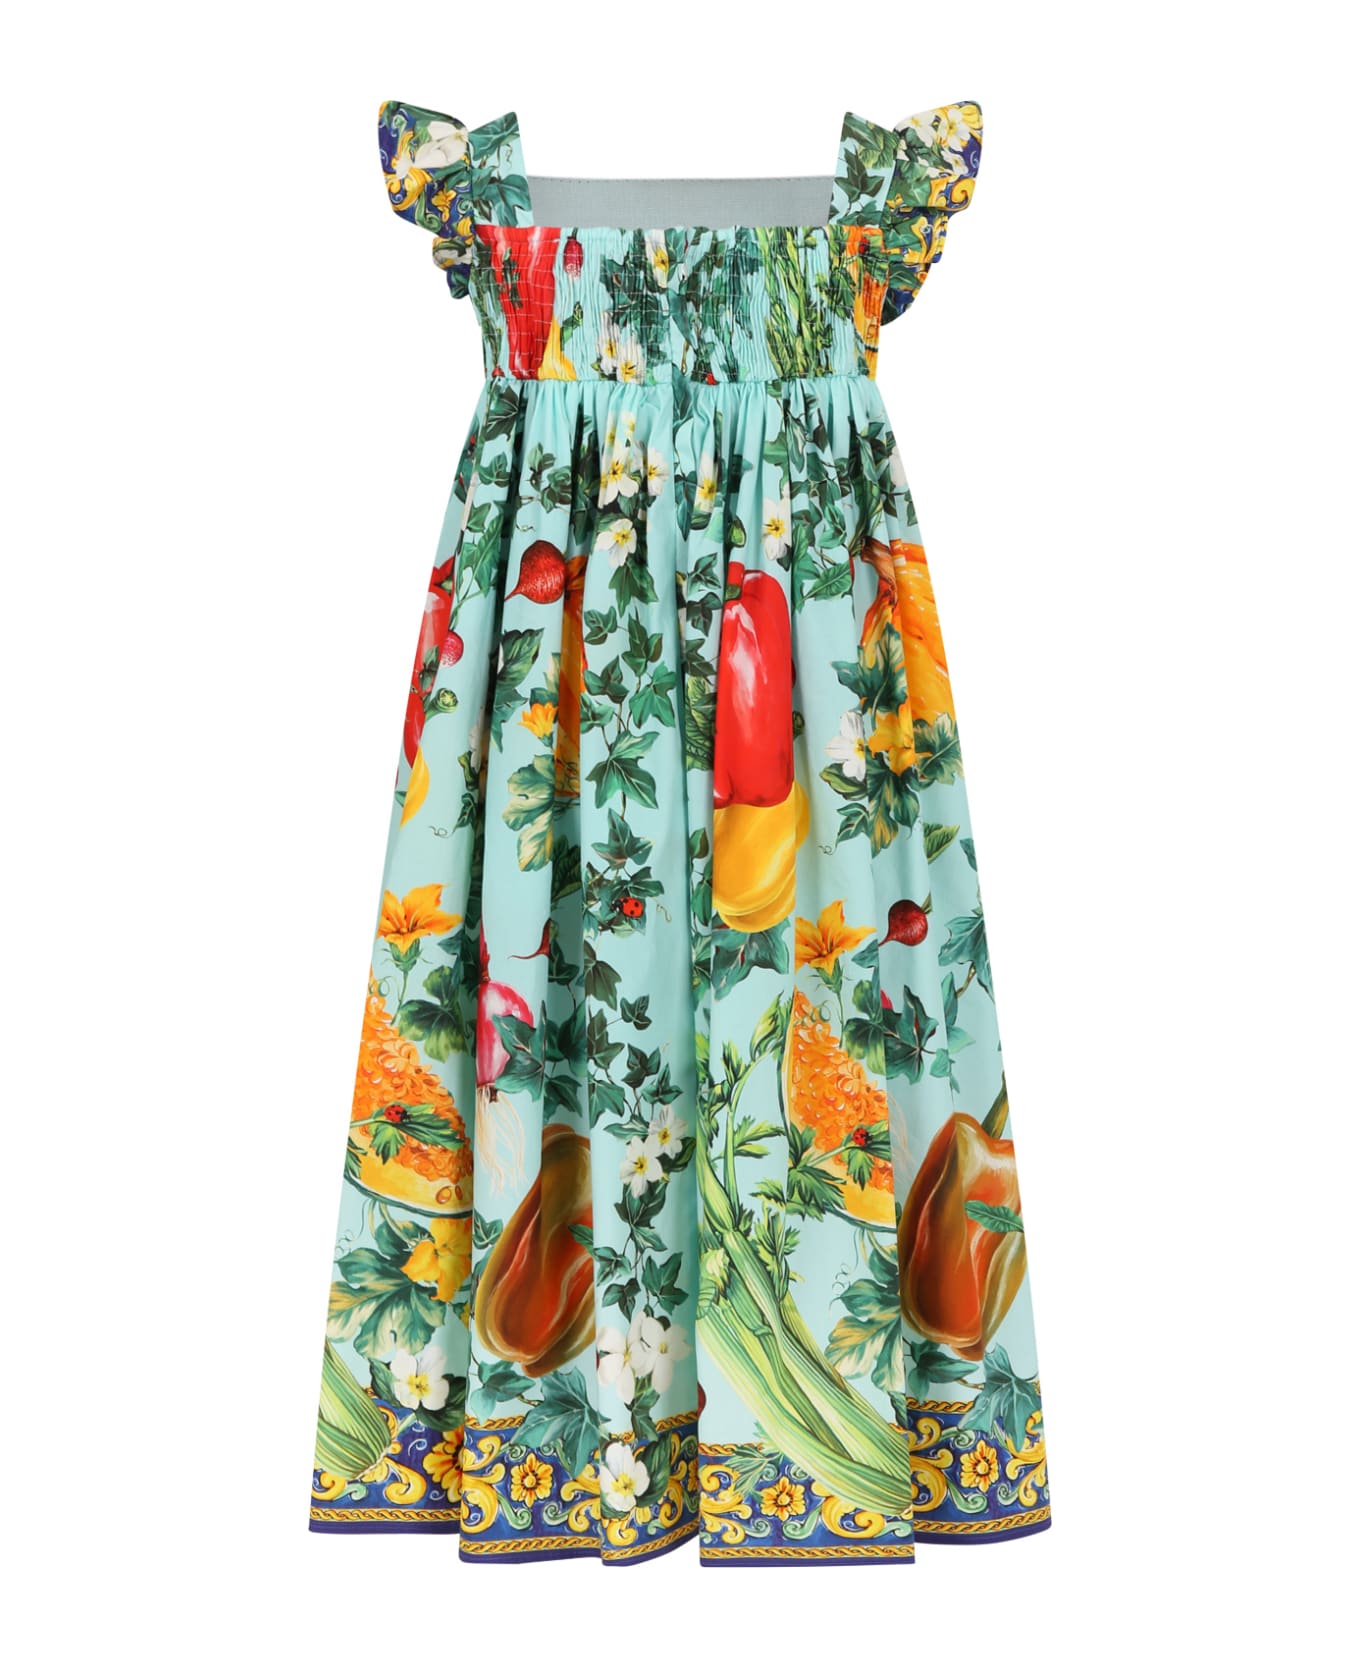 Dolce & Gabbana Multicolor Dress For Girl With Iconic Print And Logo - Multicolor